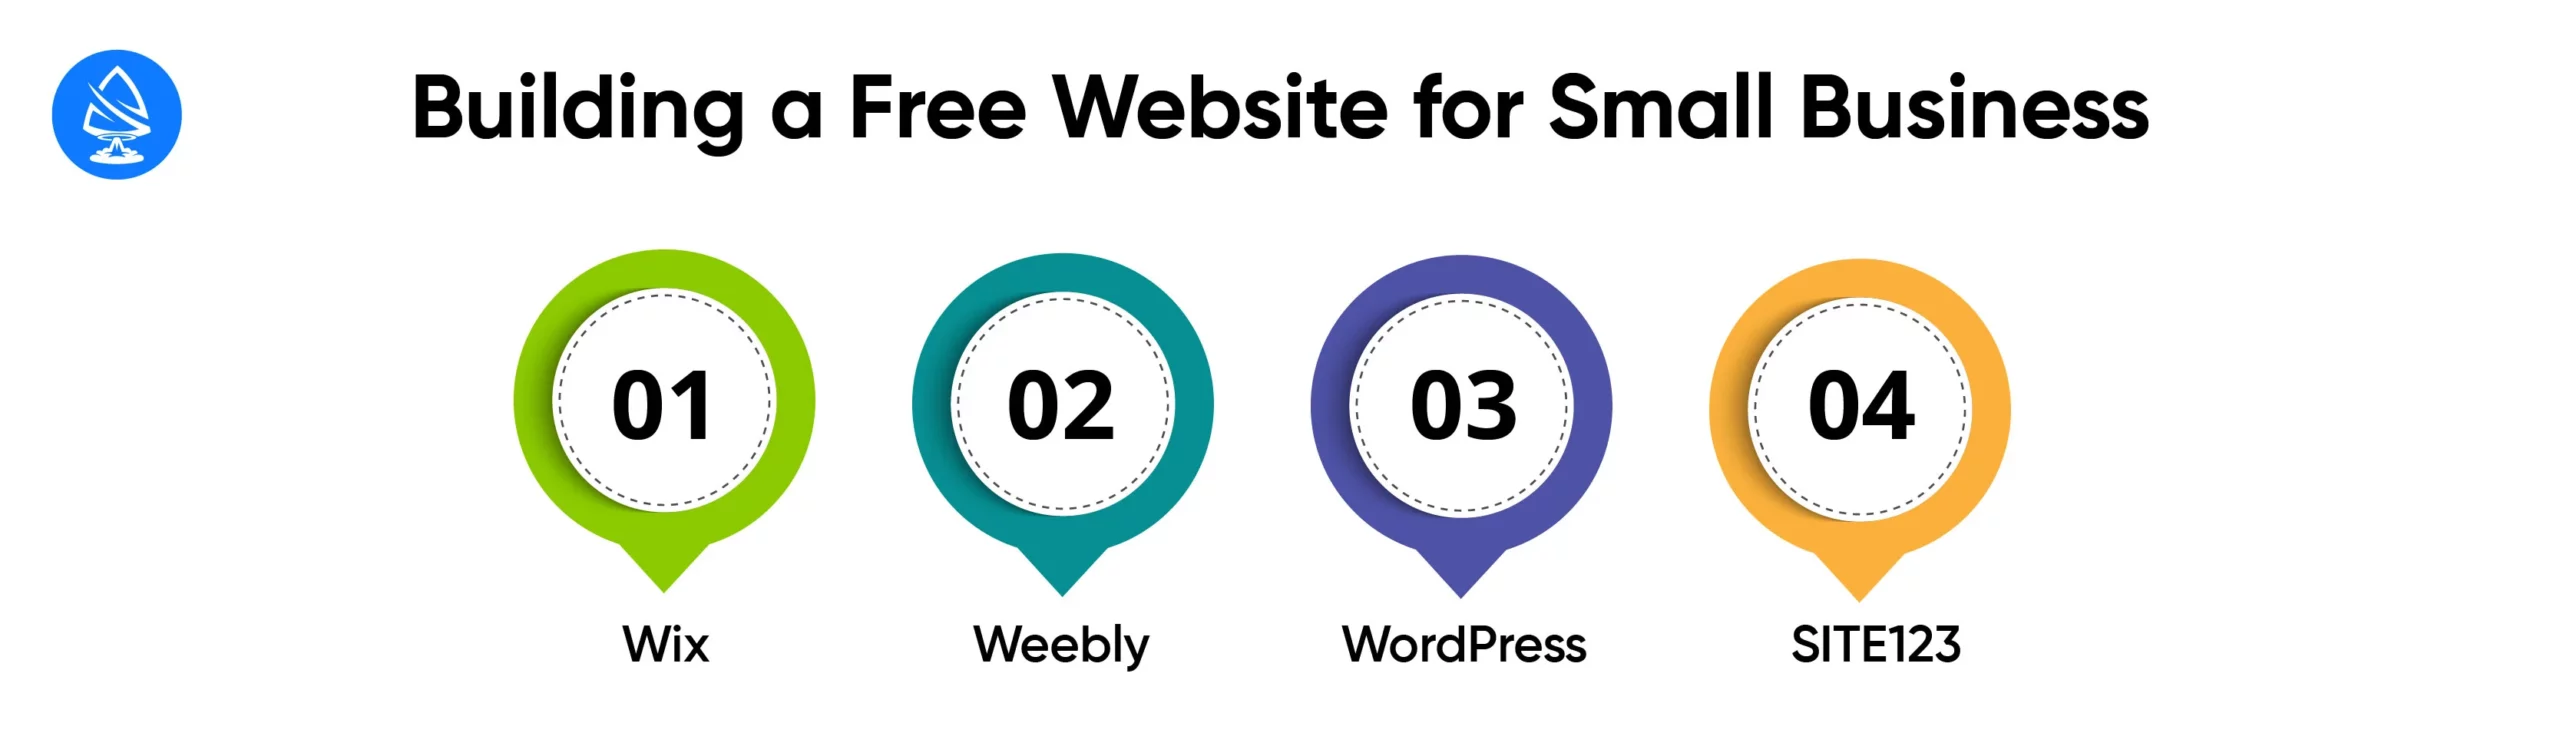 Building a Free Website for Small Business 